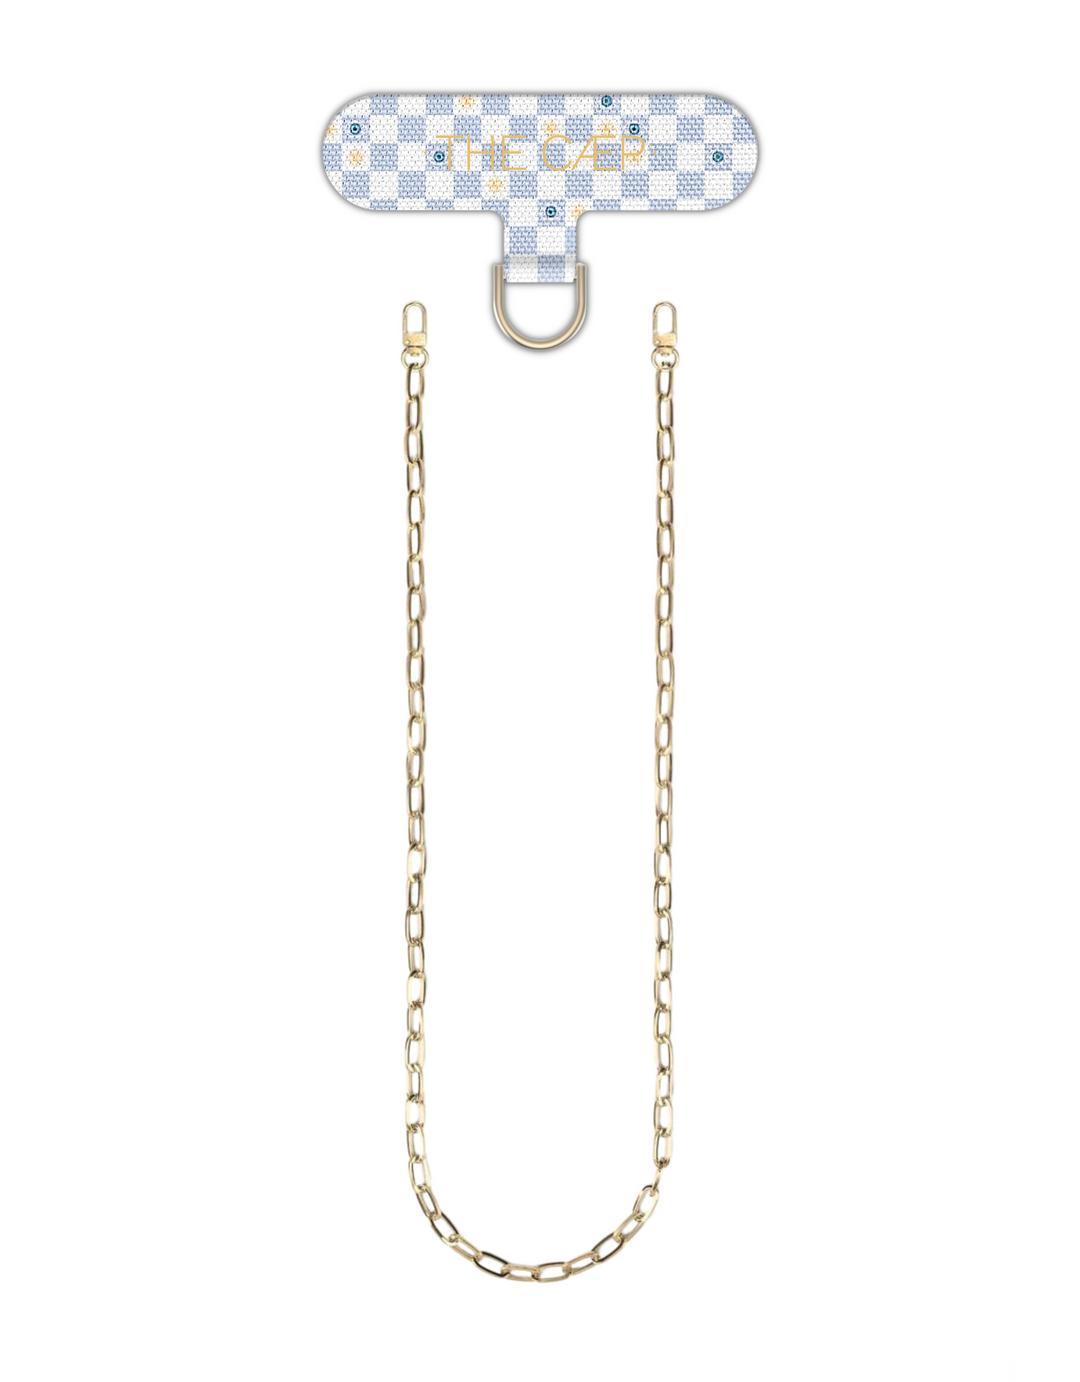 Universal Phone Hitch + Gold Paperclip Crossbody